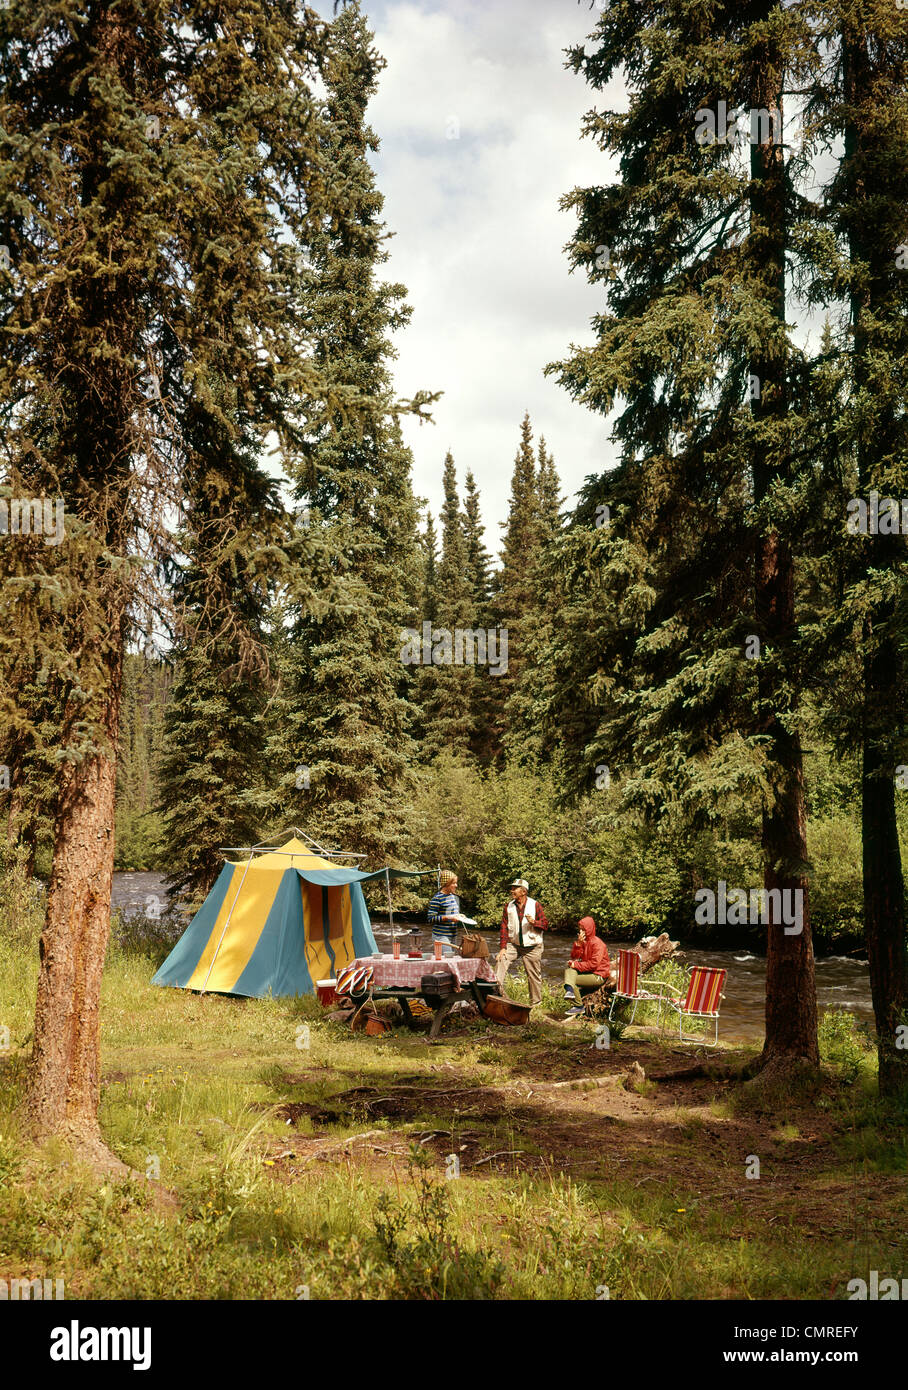 1970S 1980S FAMILIE CAMPING IM PINIENWALD NEBEN BACH Stockfoto